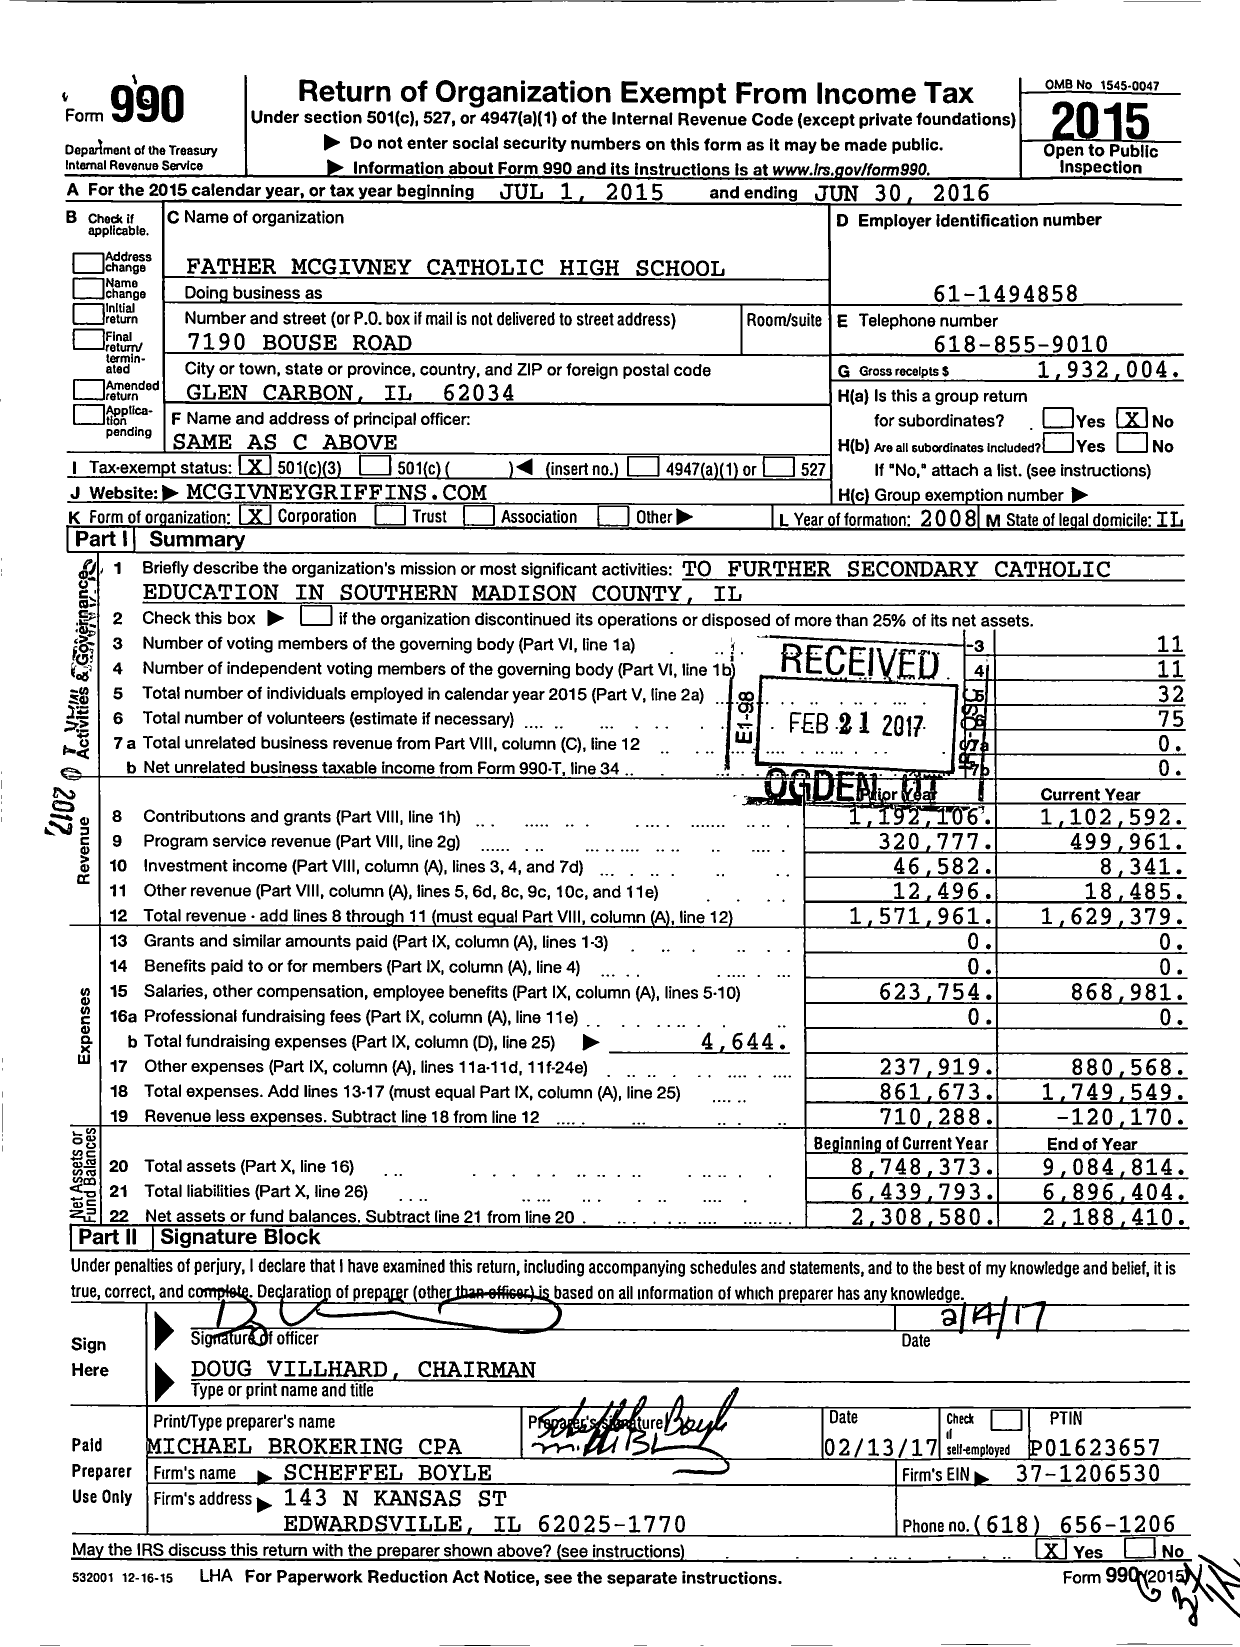 Image of first page of 2015 Form 990 for Father Mcgivney Catholic High School